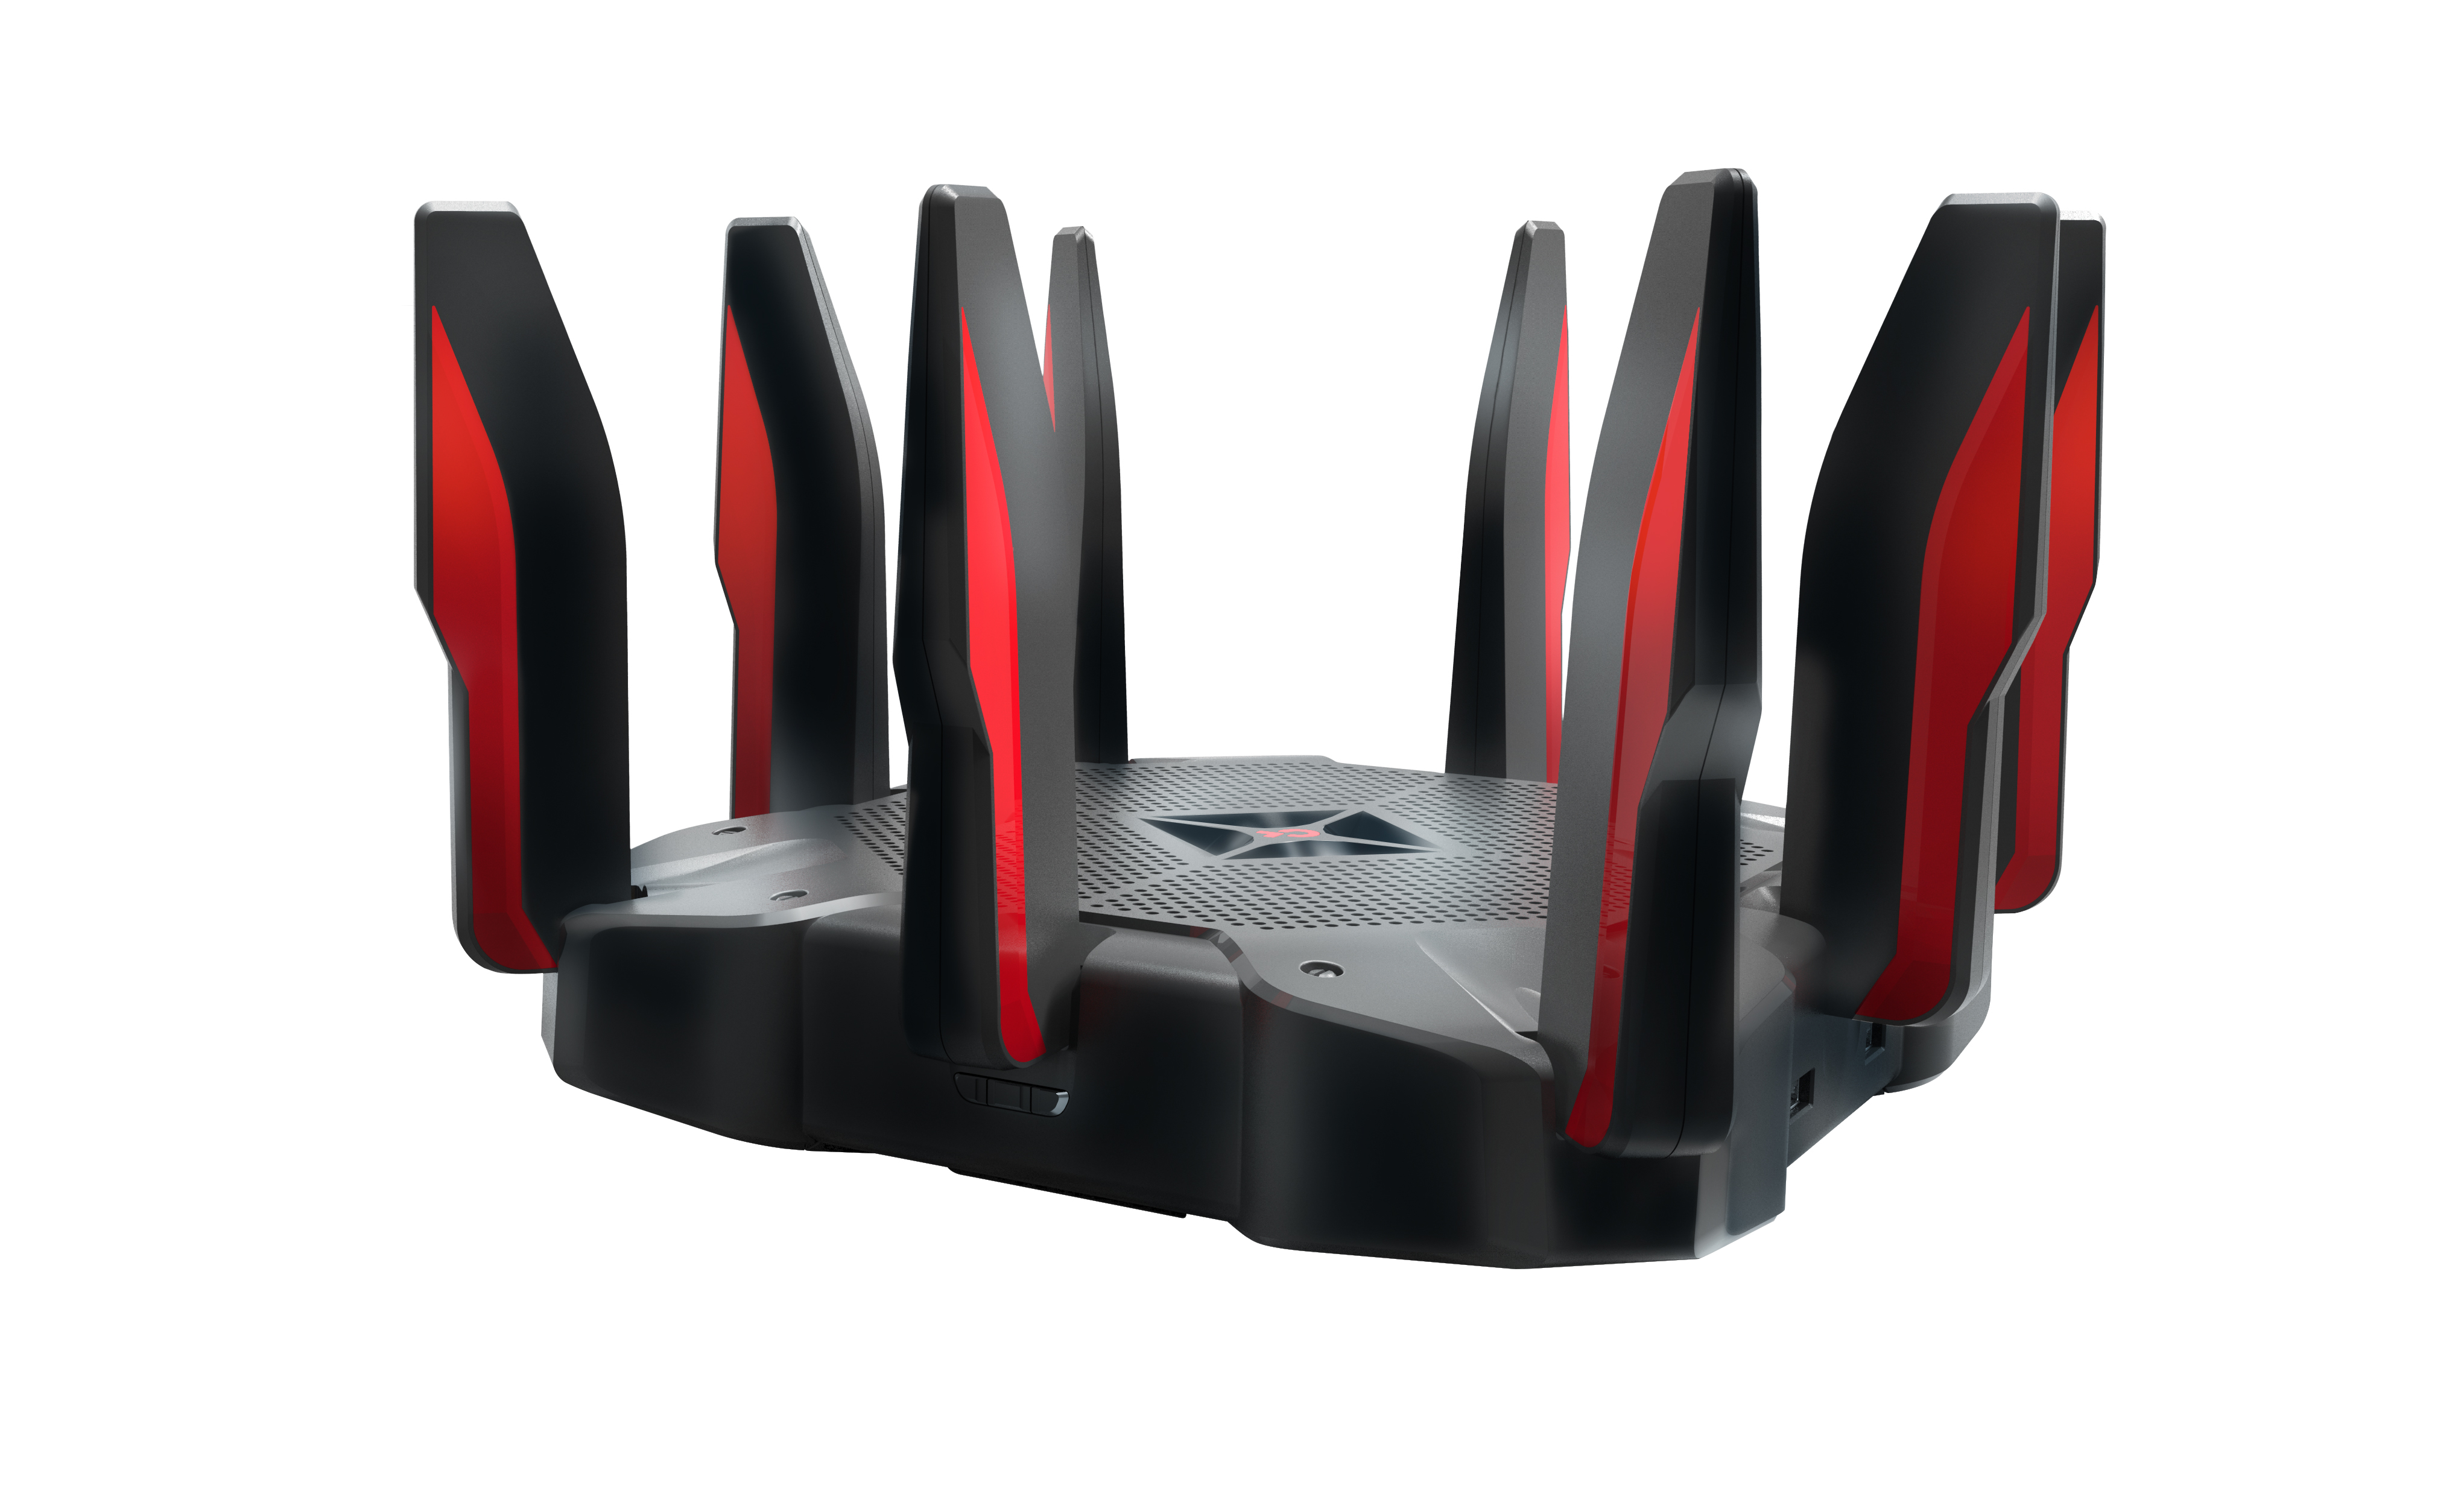 TP-Link expands its gaming router line-up with the Archer C5400X 